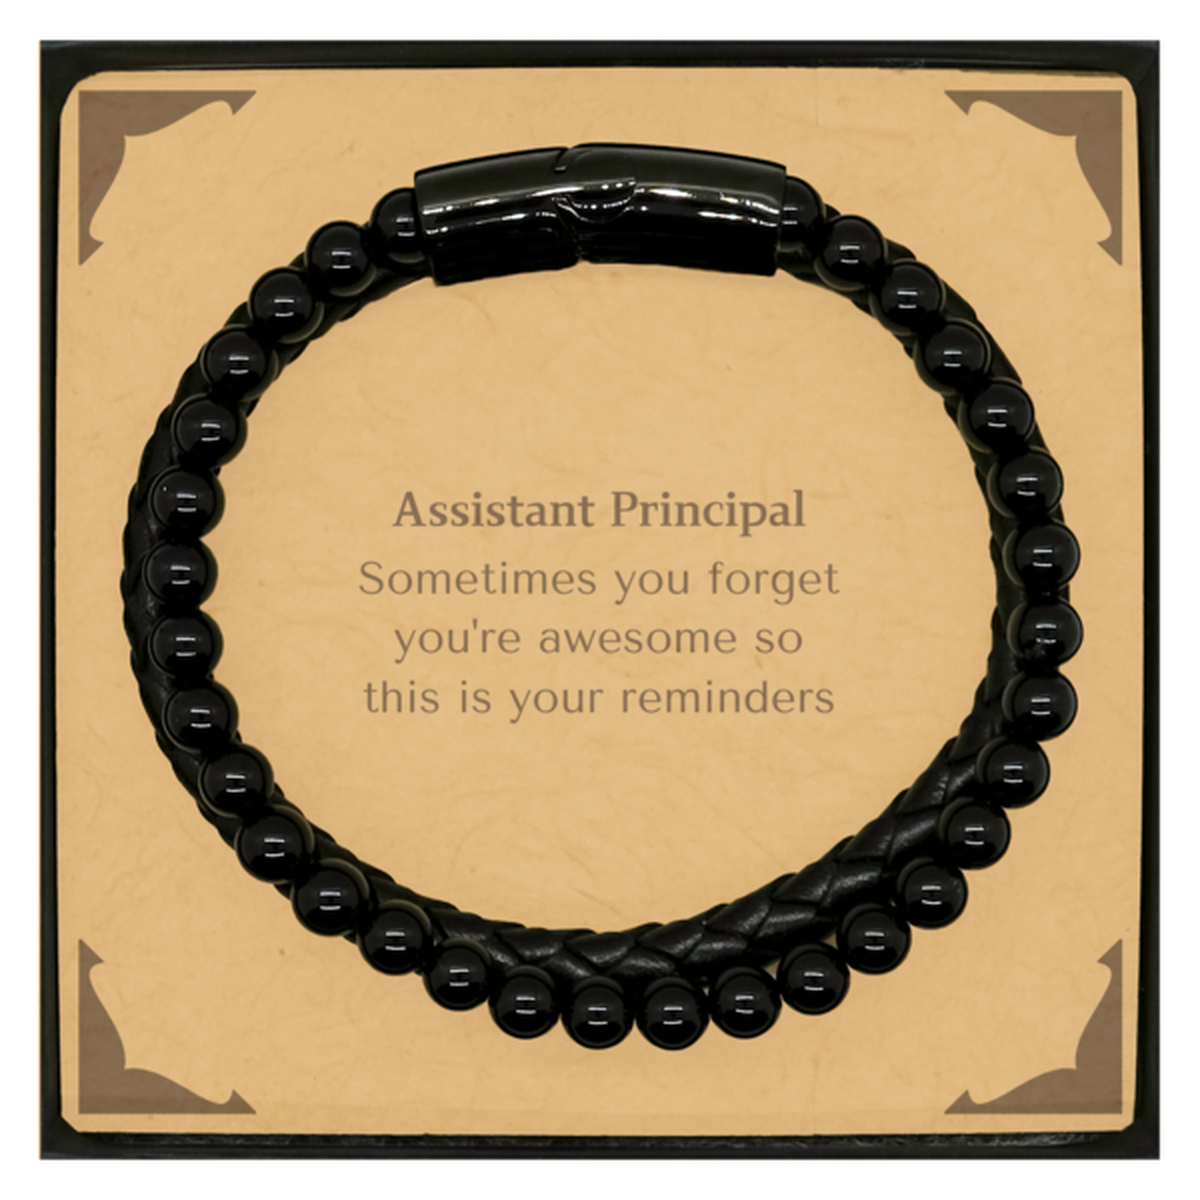 Sentimental Assistant Principal Stone Leather Bracelets, Assistant Principal Sometimes you forget you're awesome so this is your reminders, Graduation Christmas Birthday Gifts for Assistant Principal, Men, Women, Coworkers